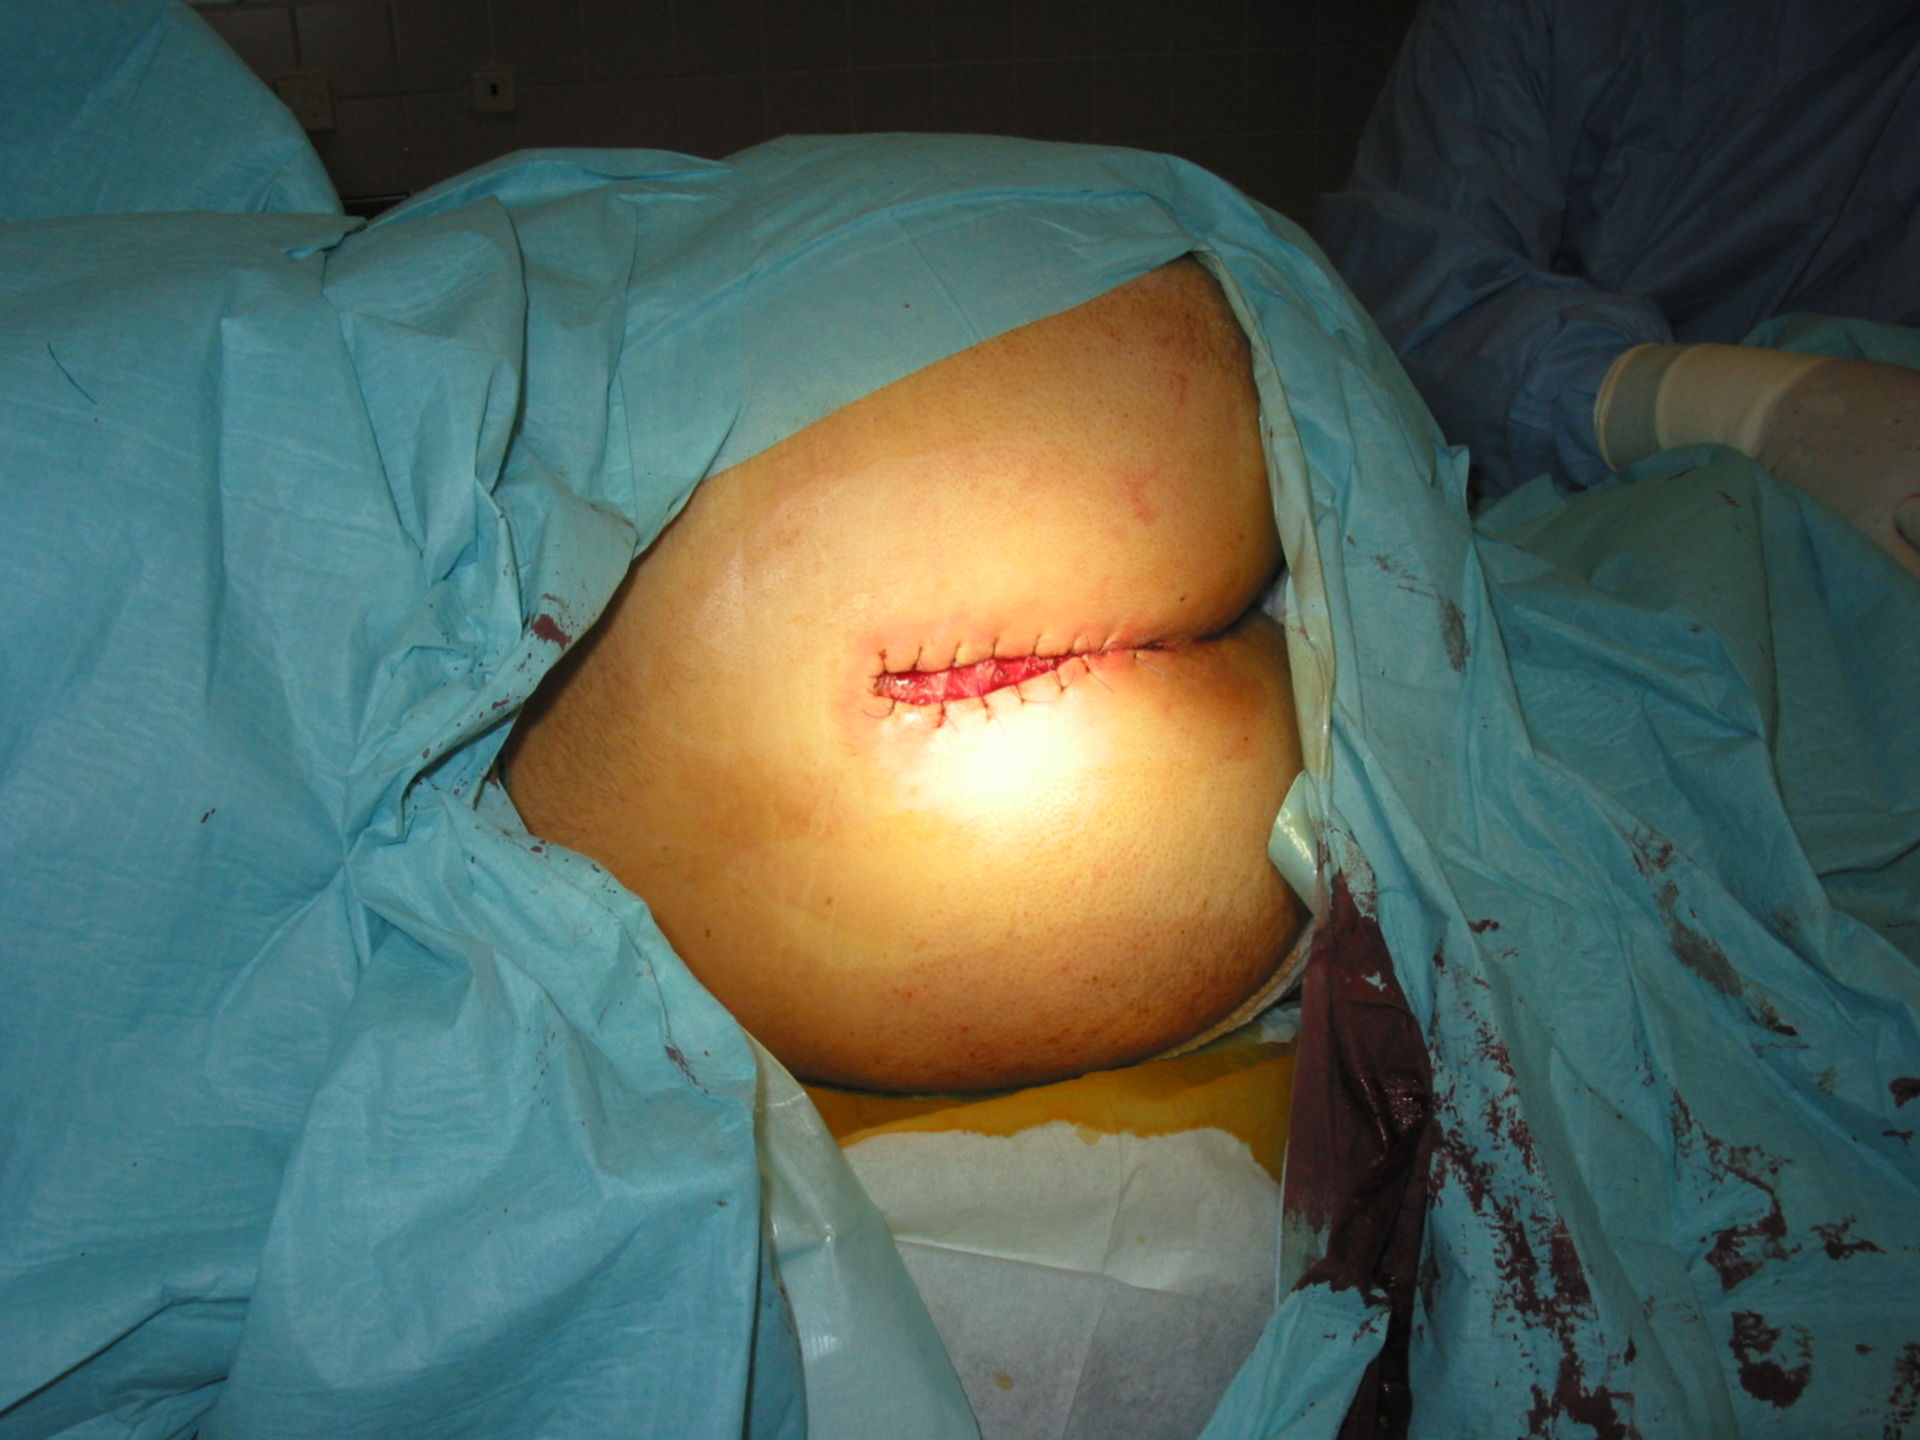 Surgical treatment of a pylonidal cyst